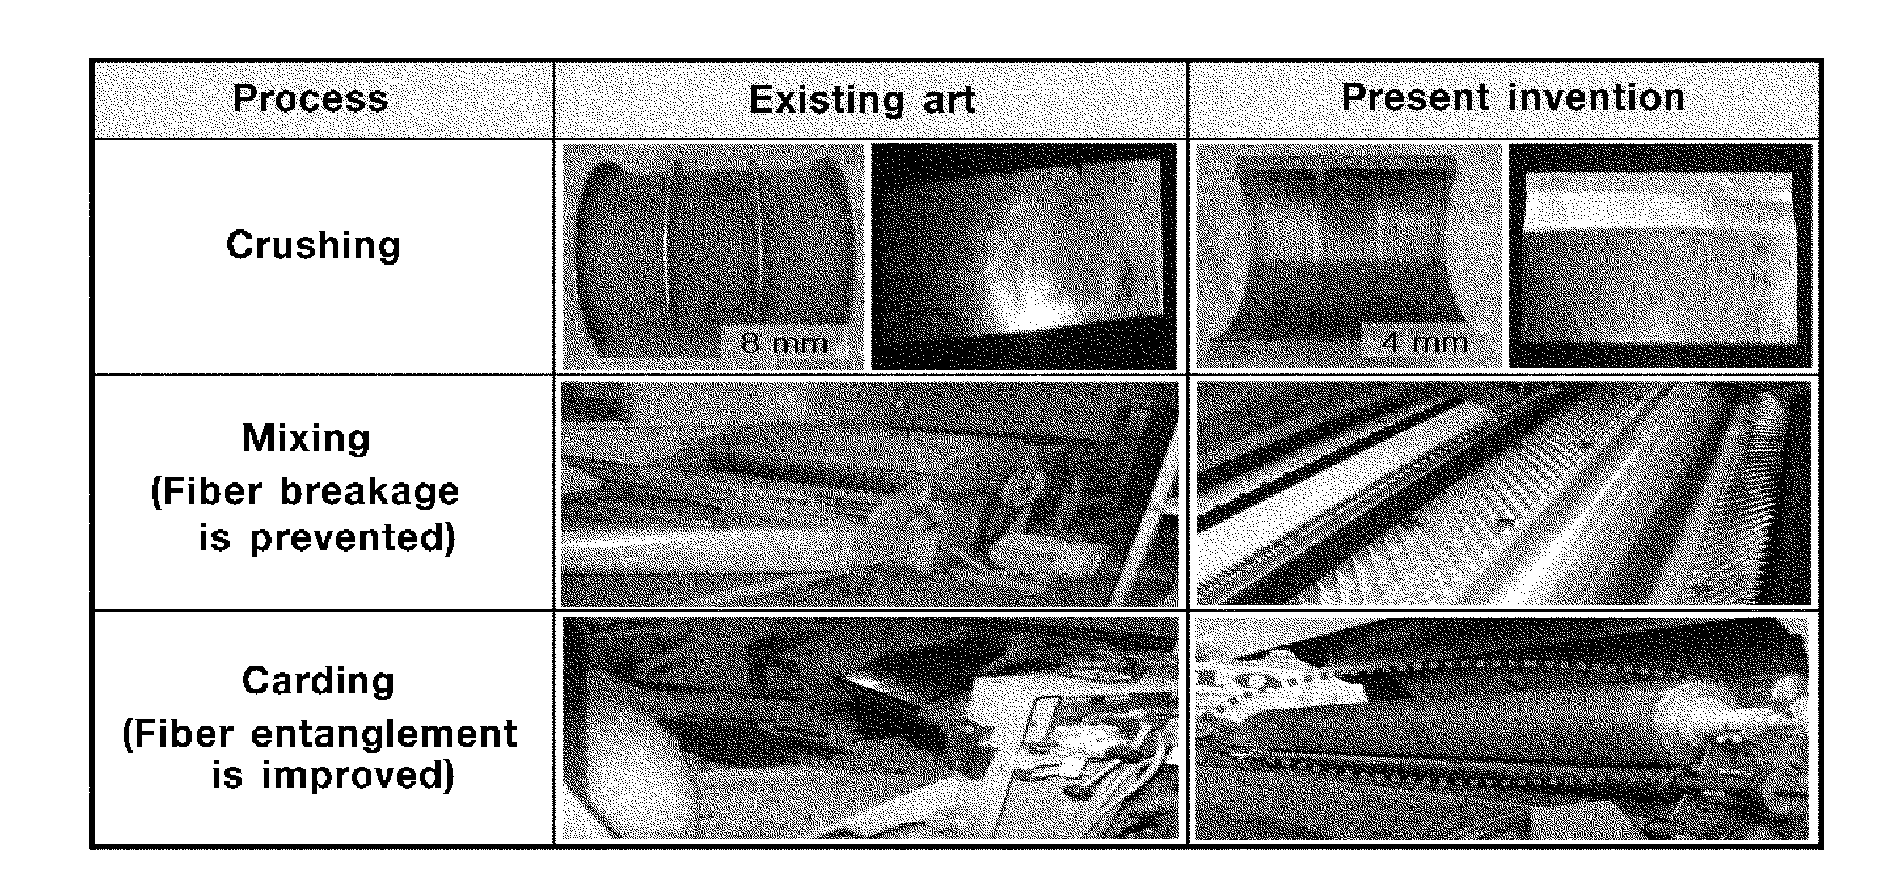 Method for manufacturing soundproofing material using polyurethane foam from car seat foam and composition thereof prepared thereby